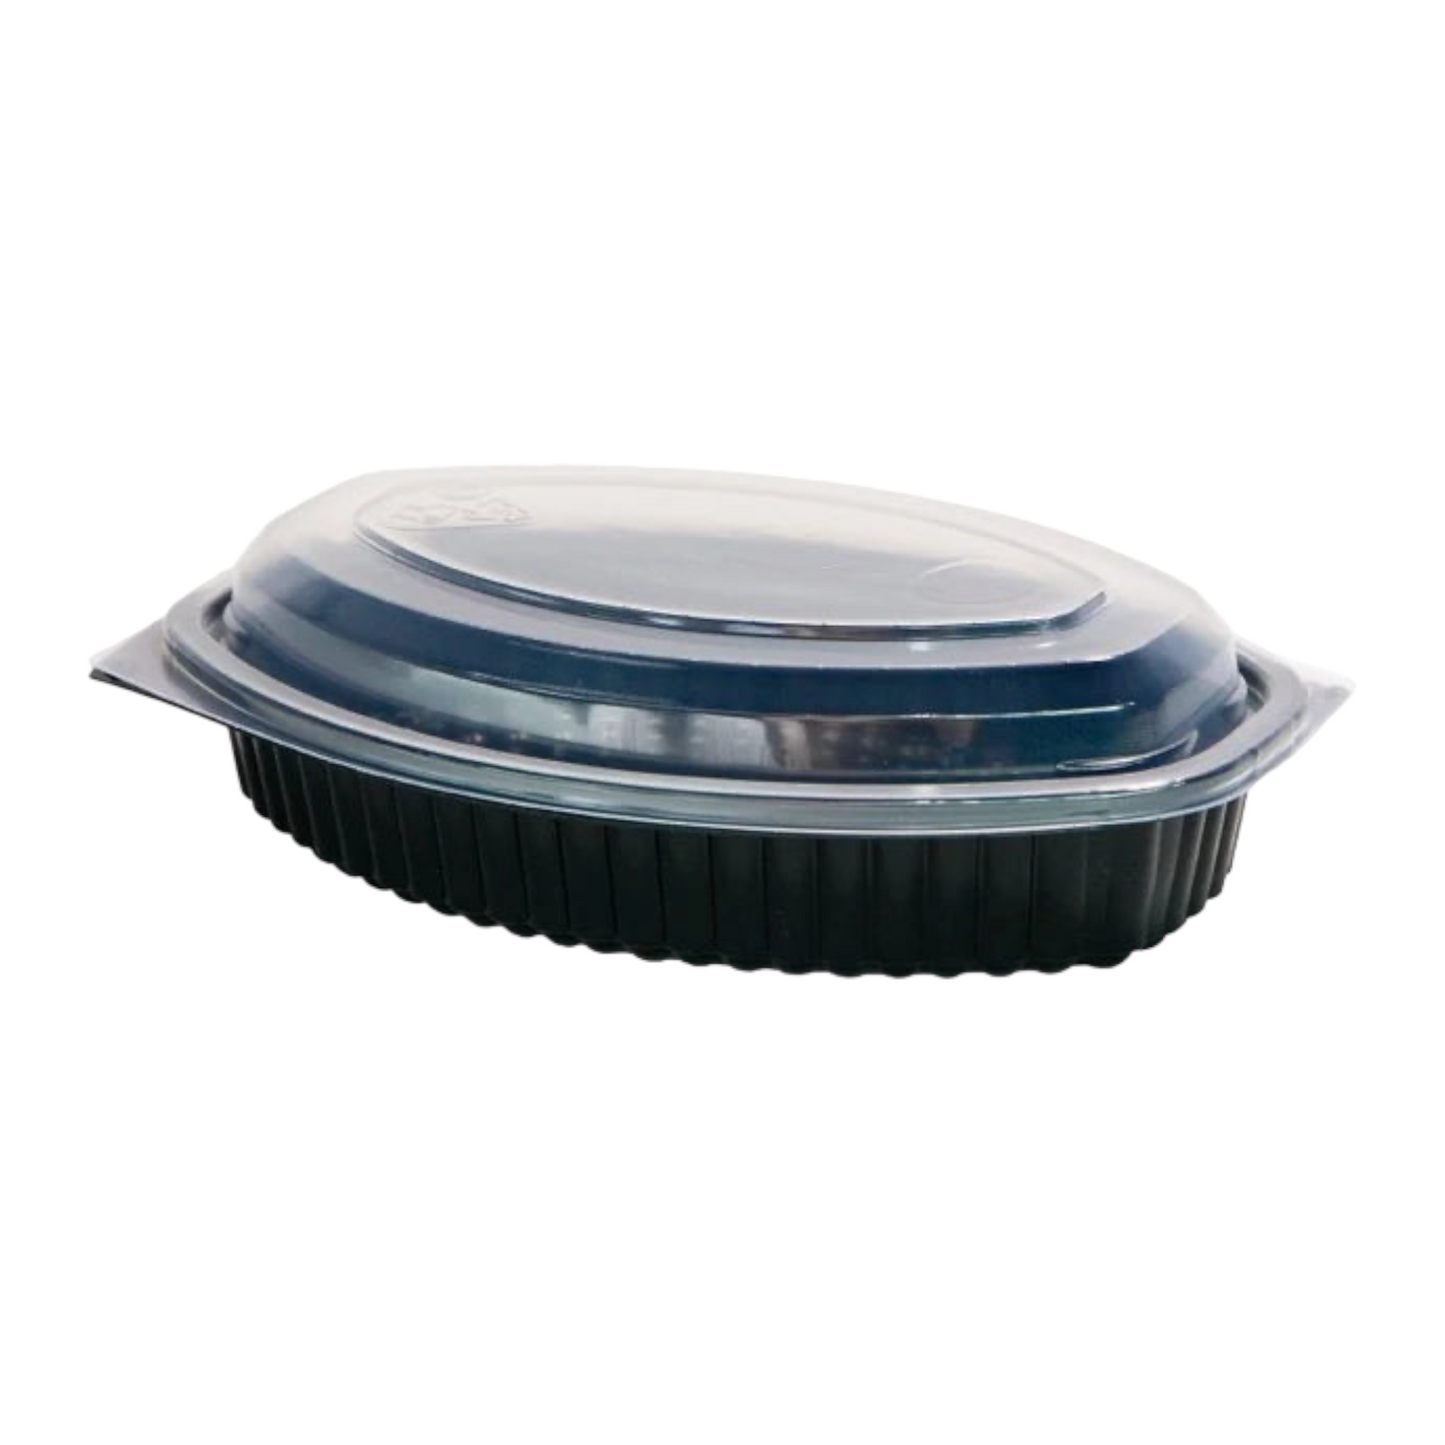 Mani [M-7100 PP] 16oz Oval Microwave Container (Base)